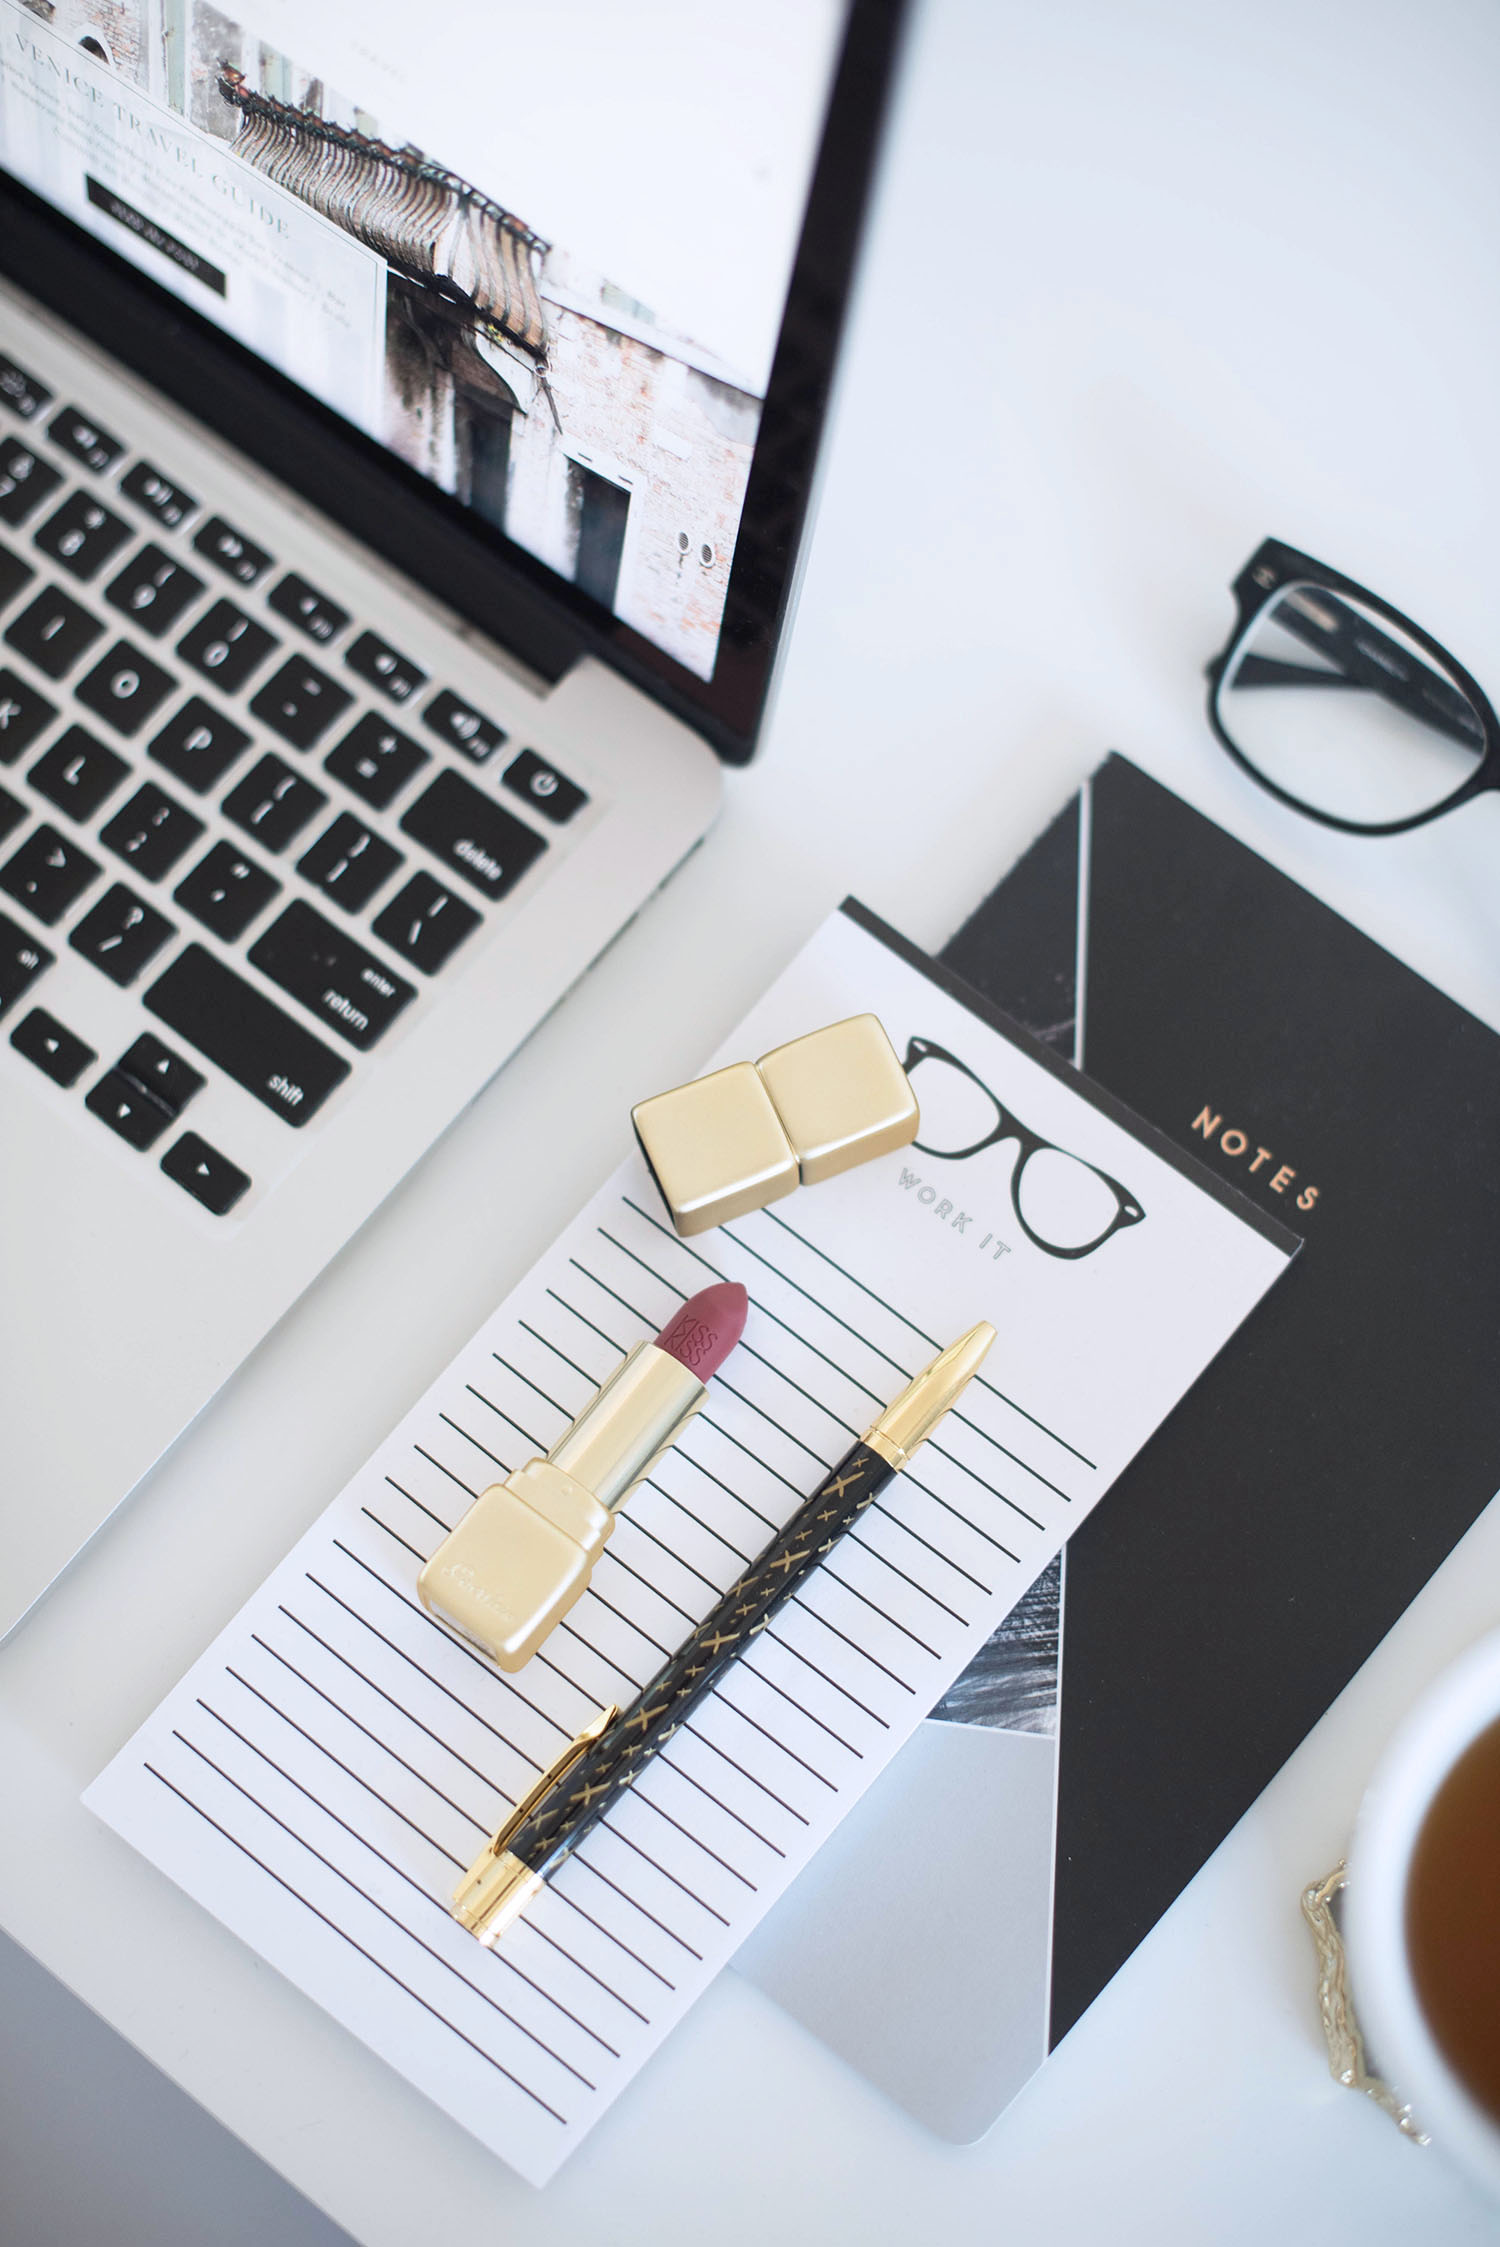 Desk details in the home office of Winnipeg fashion blogger Cee Fardoe of Coco & Vera, including Guerlain lipstick, Chanel glasses and a Jot it Down pen